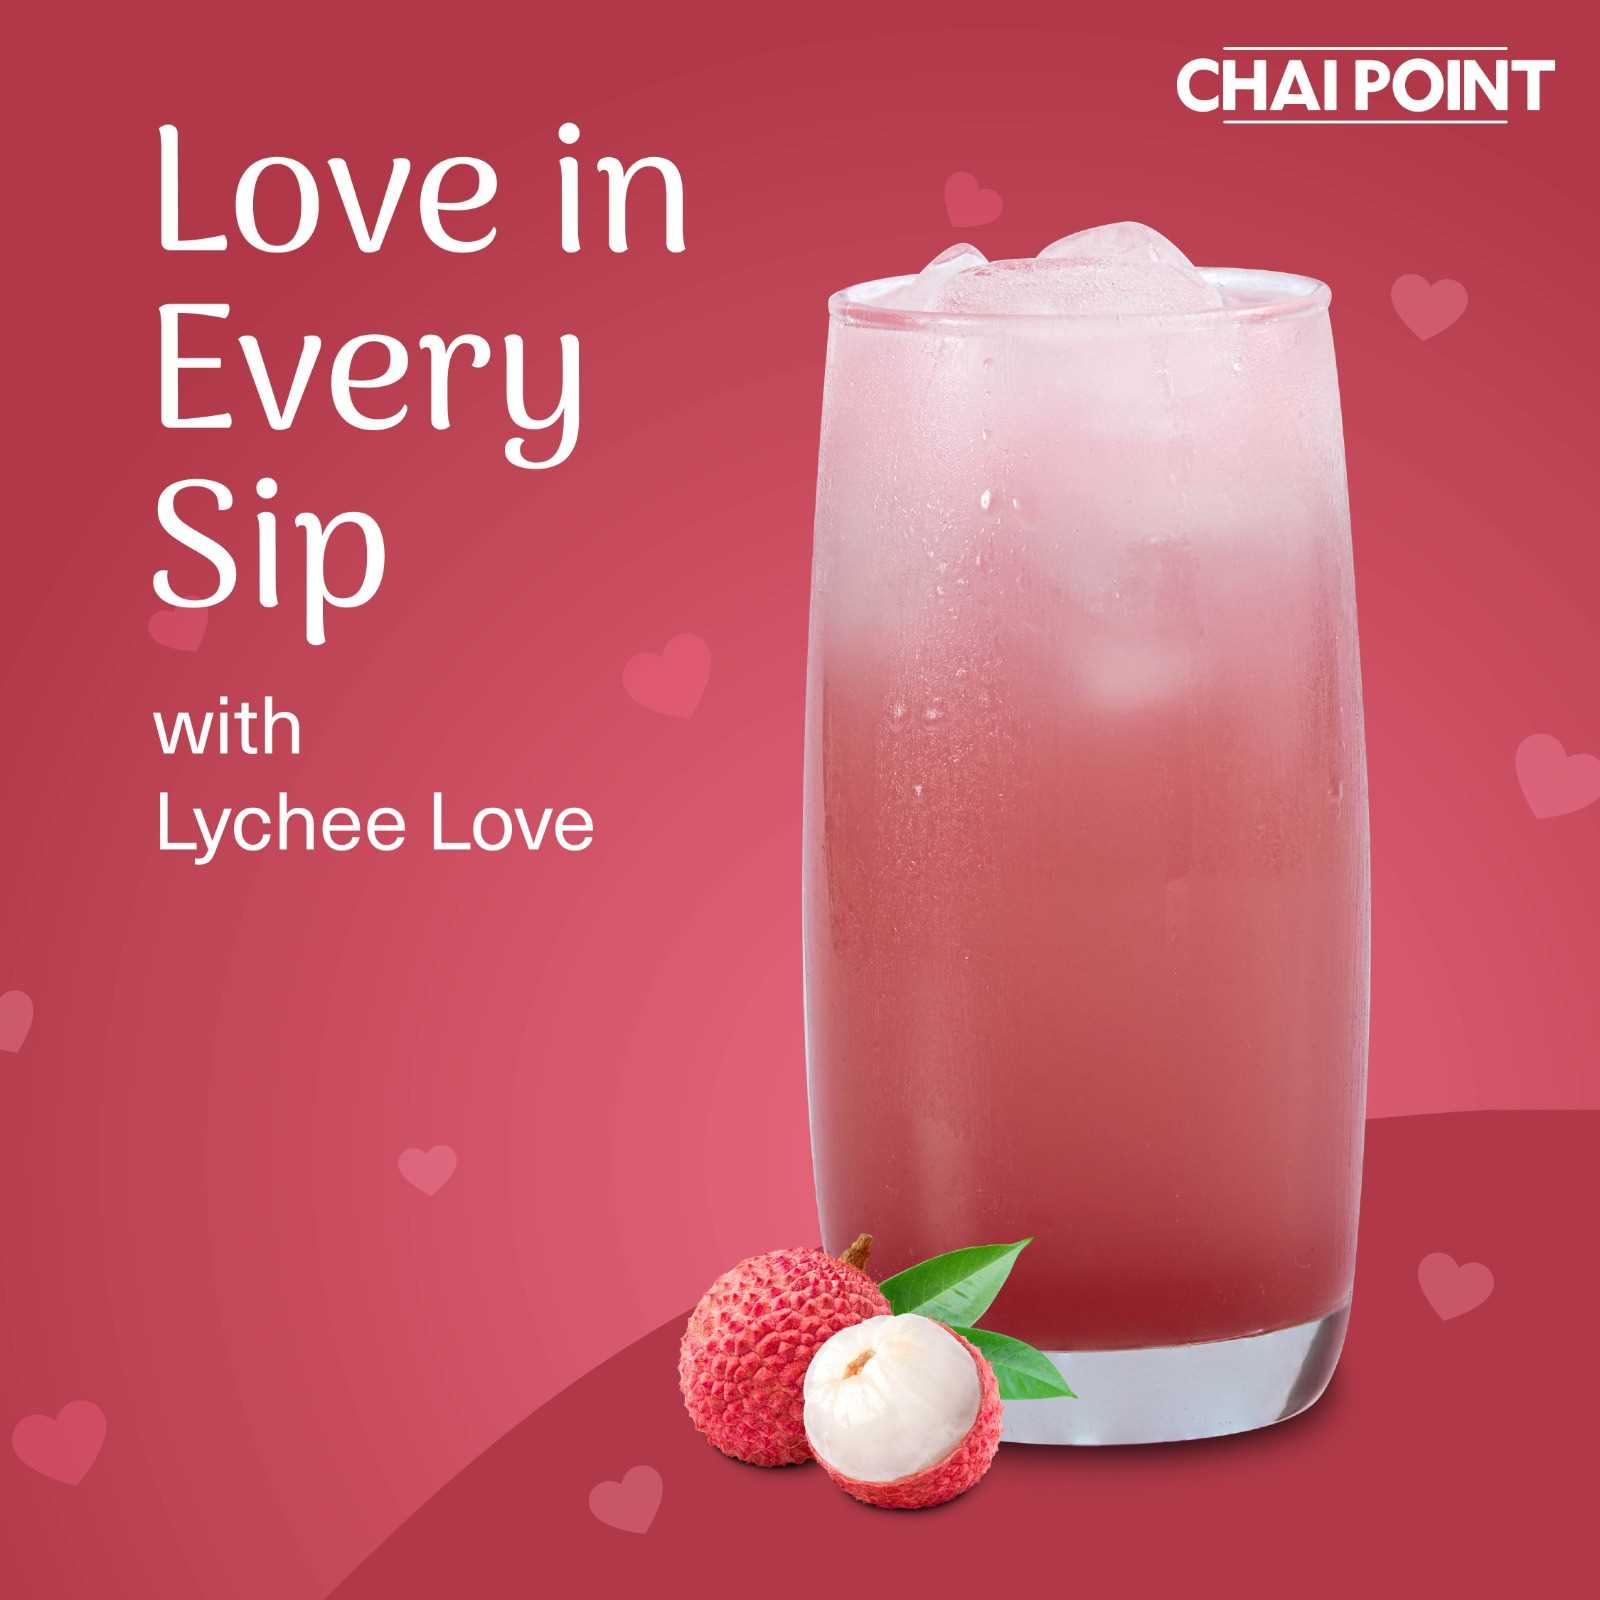 Chai Point - Ambience Mall, Gurugram Cafe - Sector 24 - Ambience Mall, Gurugram